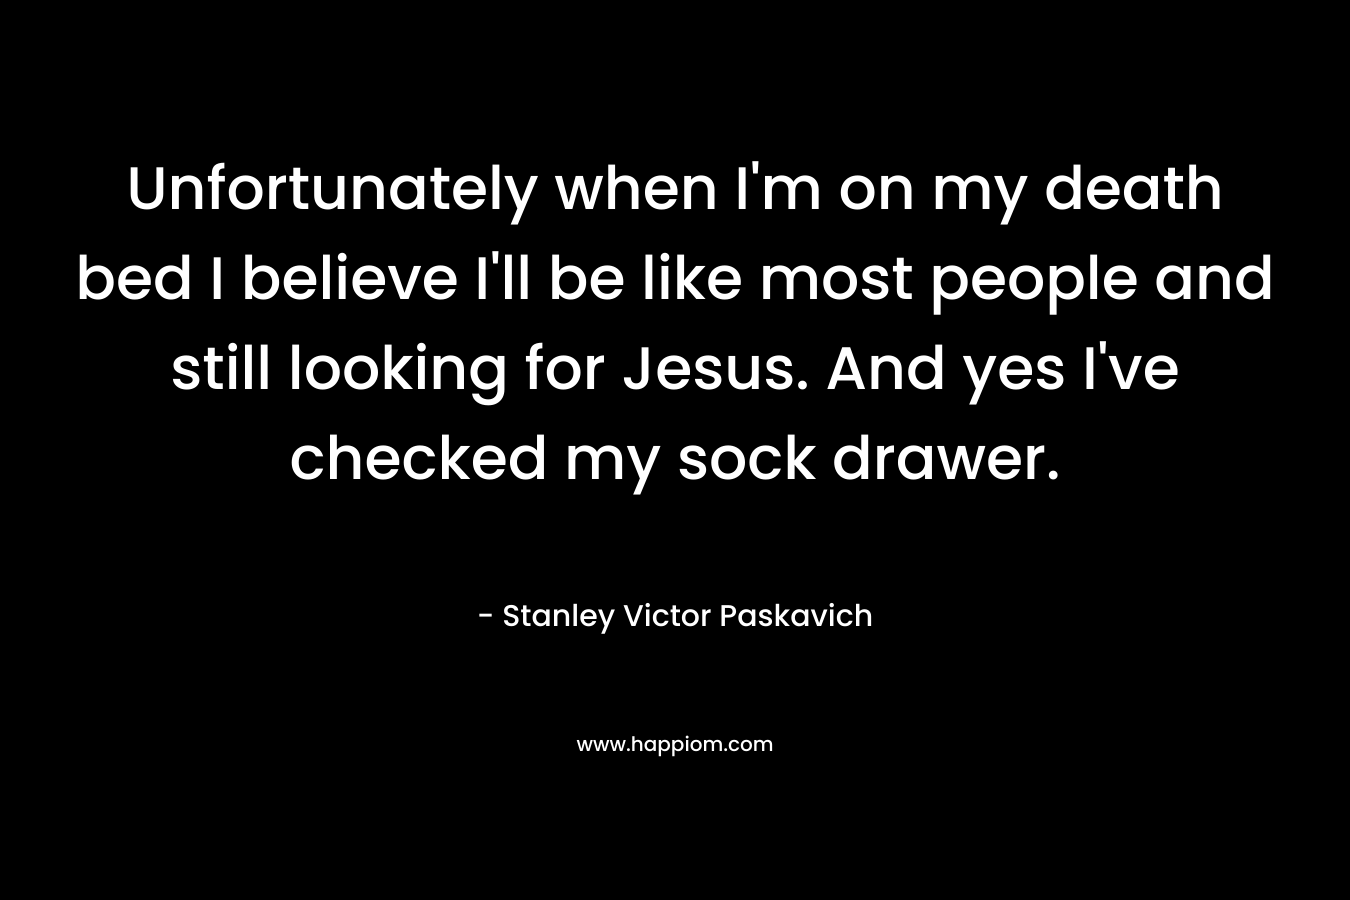 Unfortunately when I’m on my death bed I believe I’ll be like most people and still looking for Jesus. And yes I’ve checked my sock drawer. – Stanley Victor Paskavich